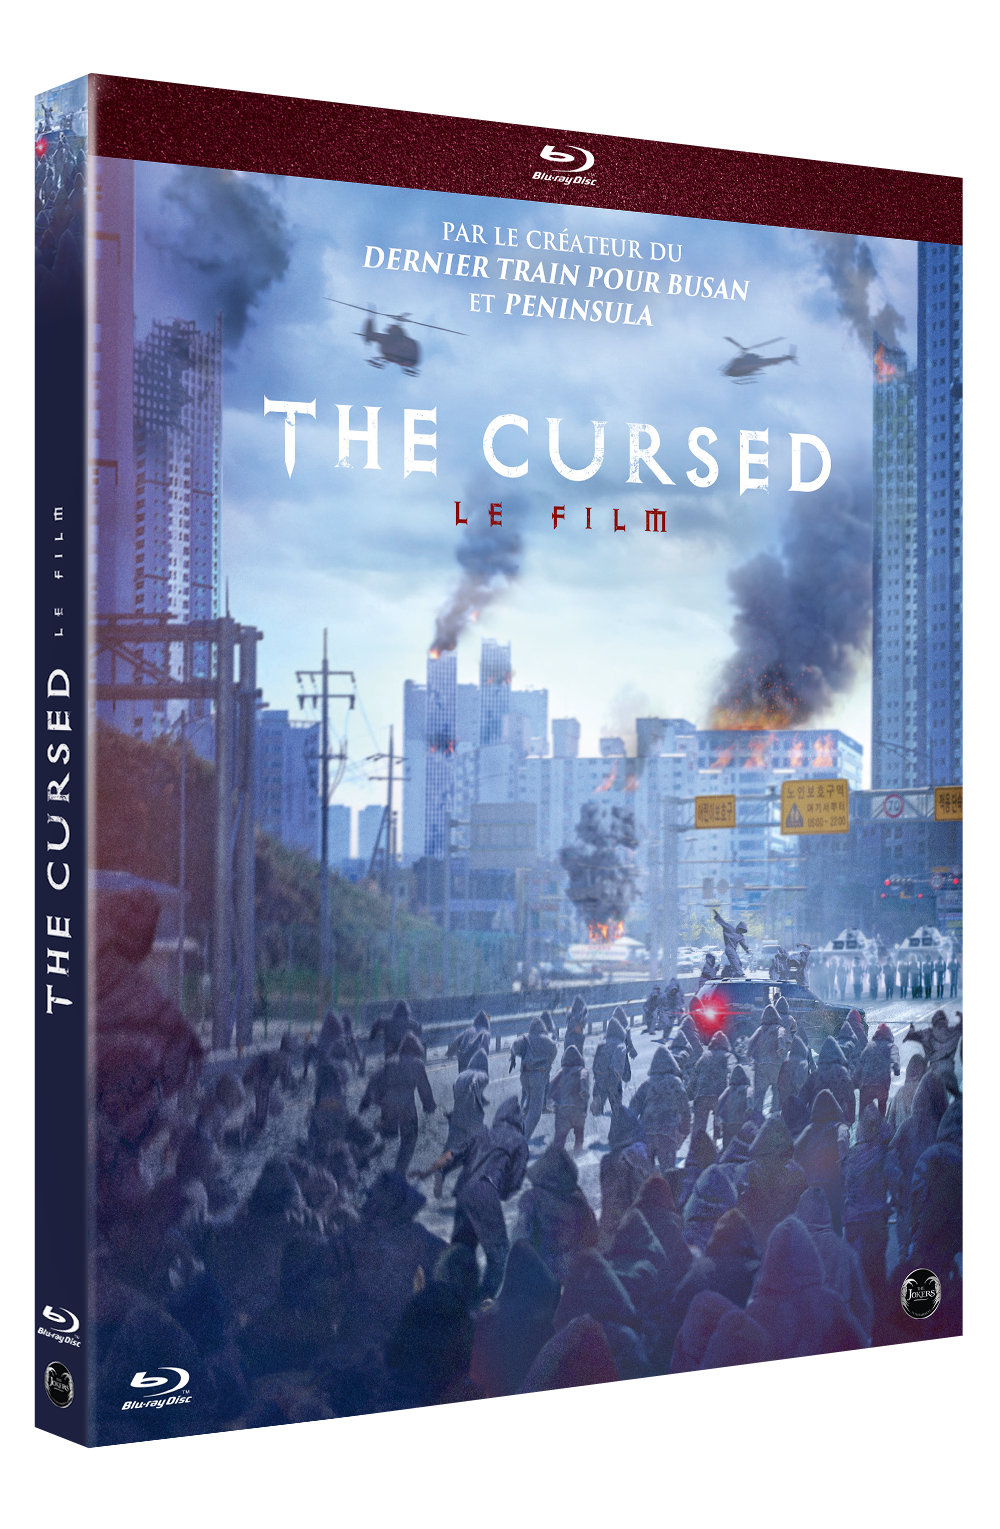 Blu-Ray "The Cursed"